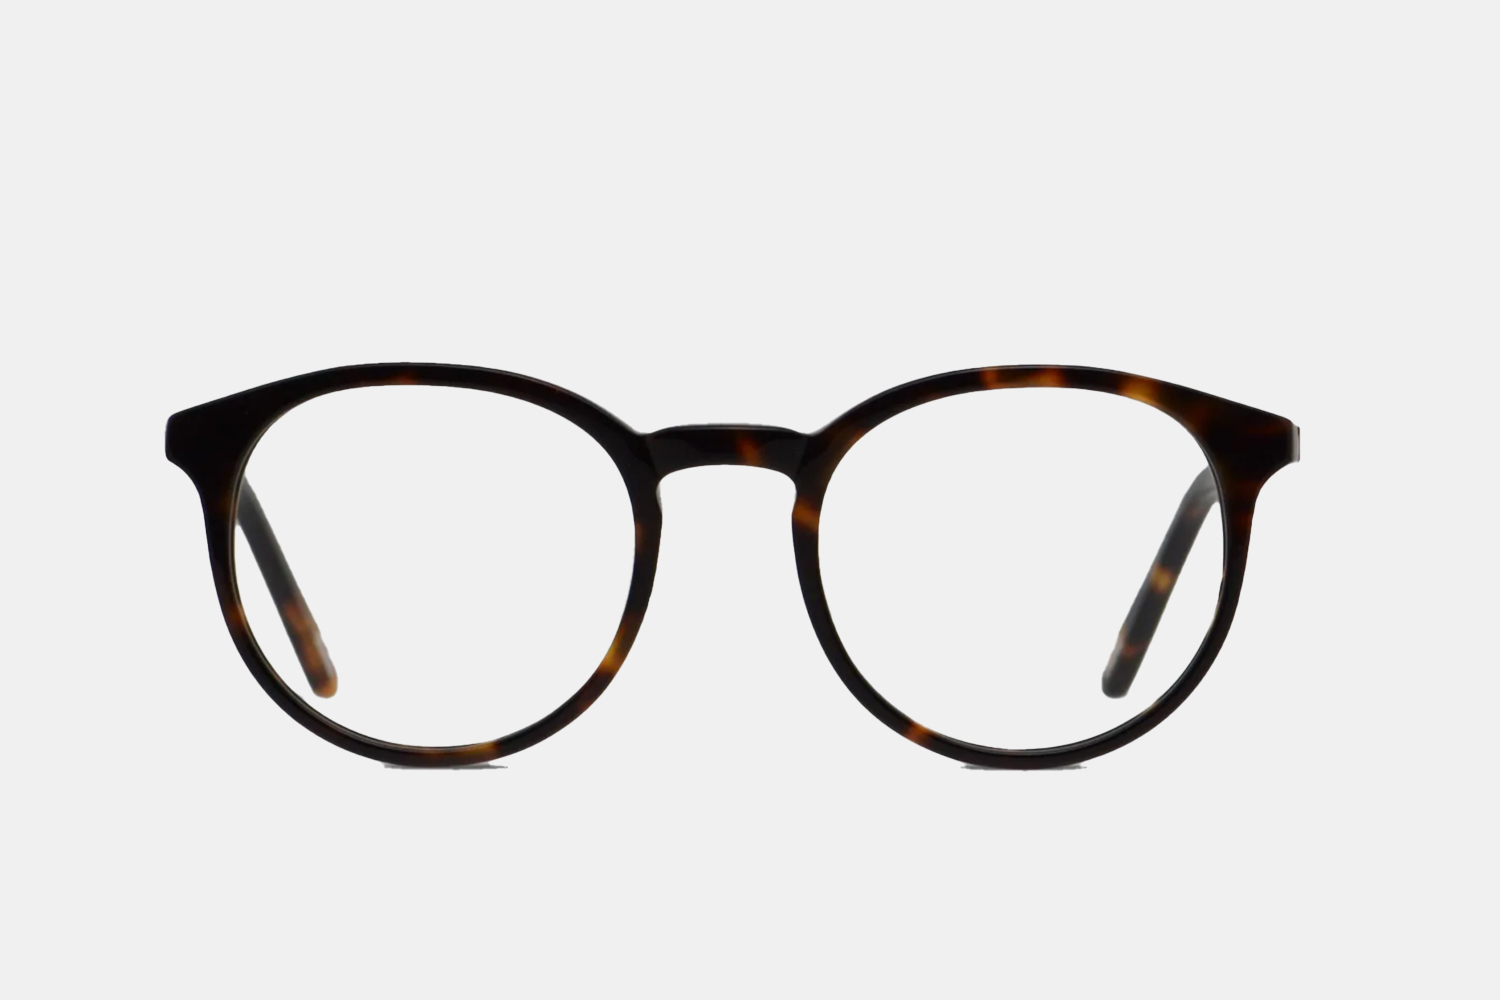 A pair of glasses frames.